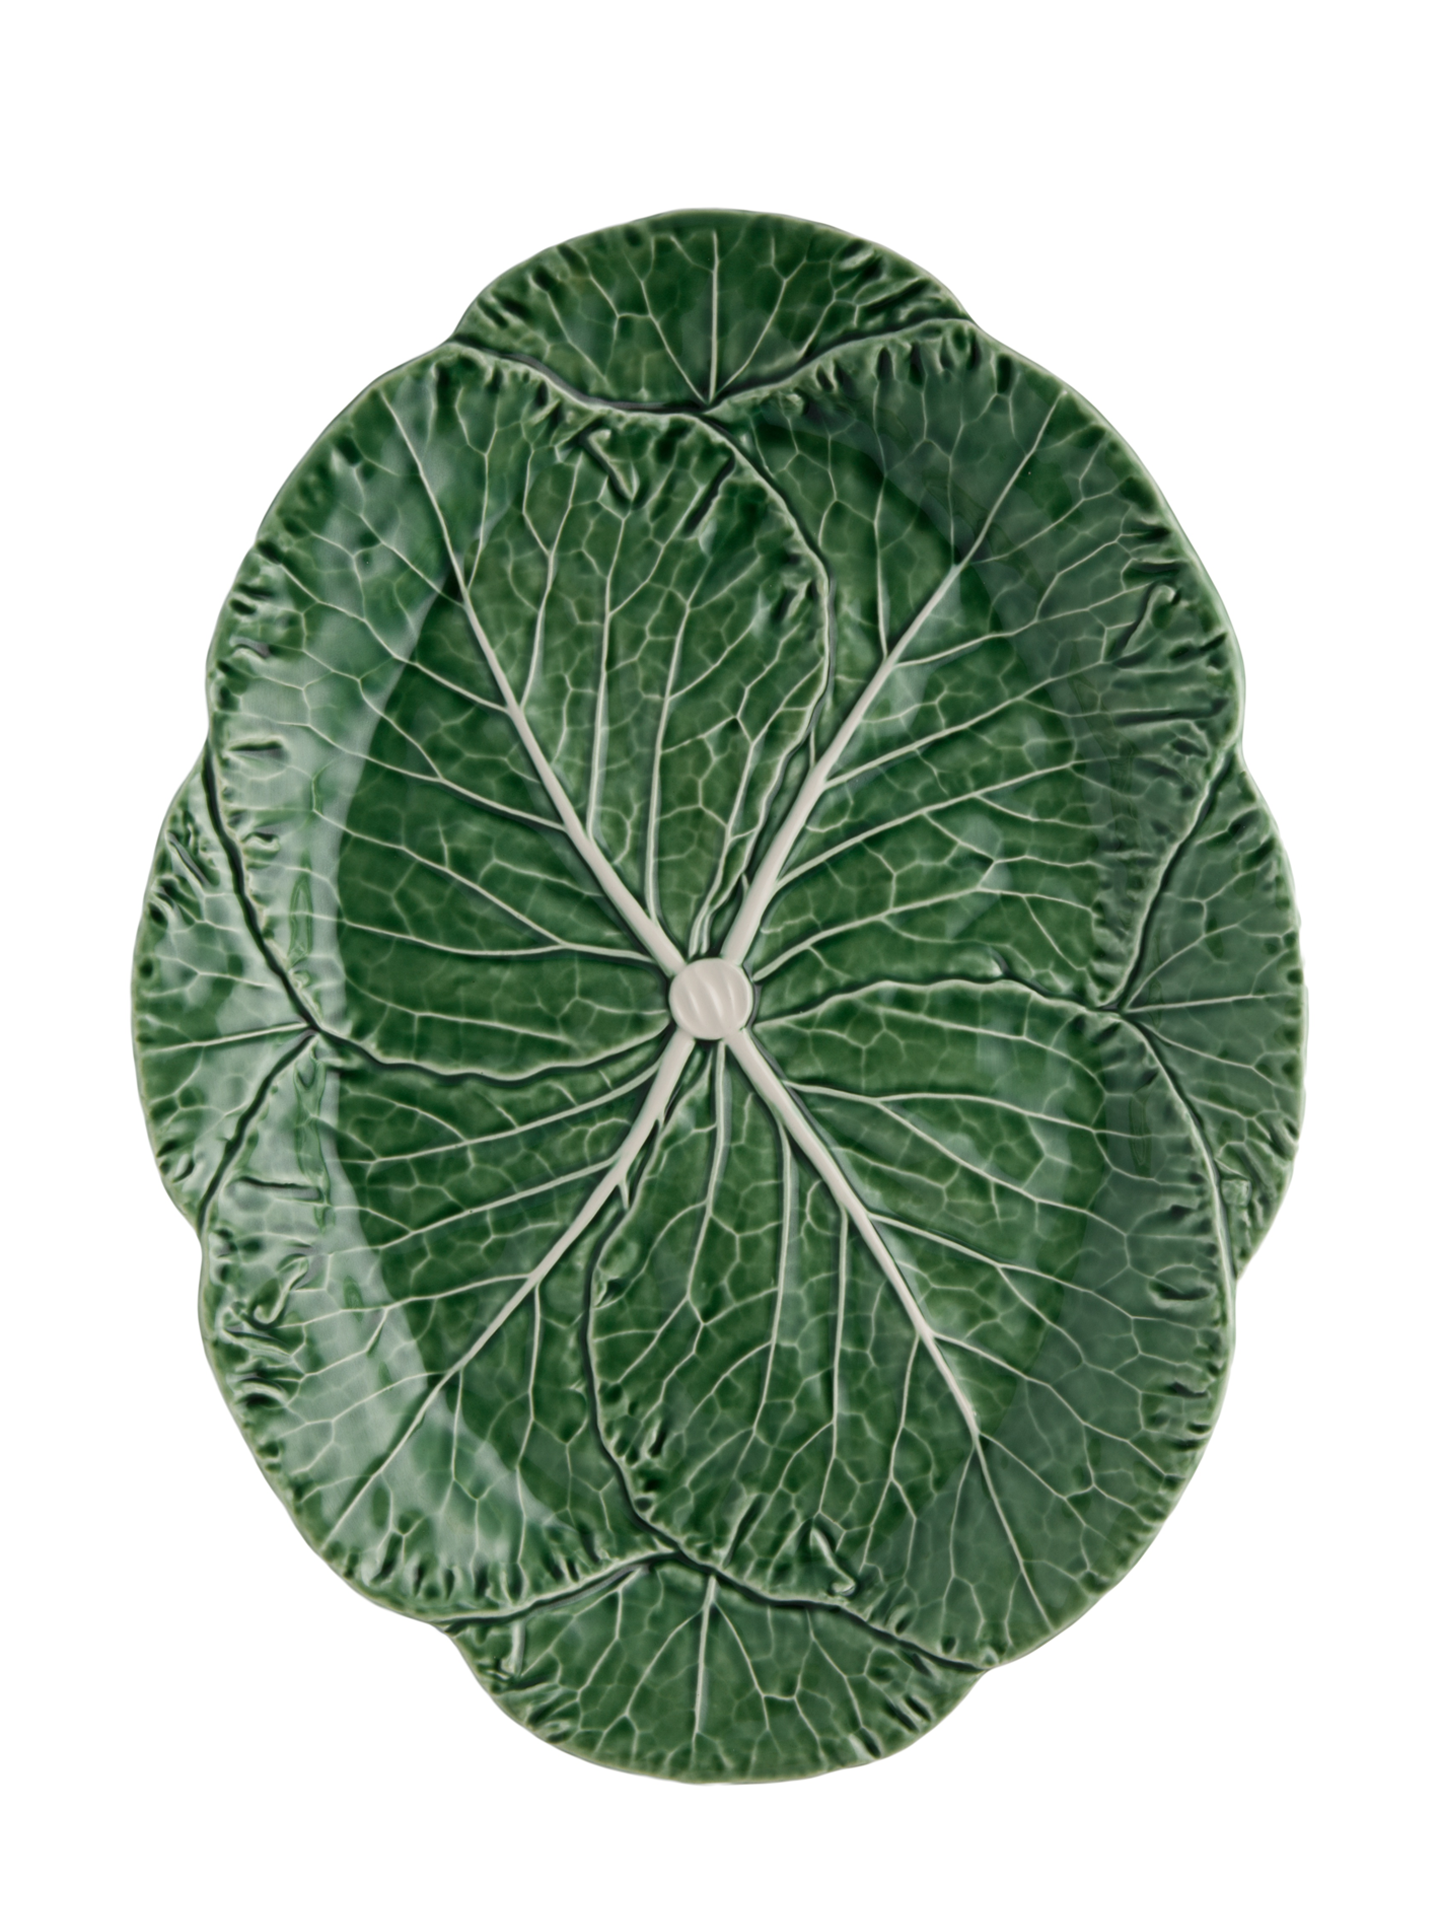 Large Oval Cabbage Platter (43cm), green